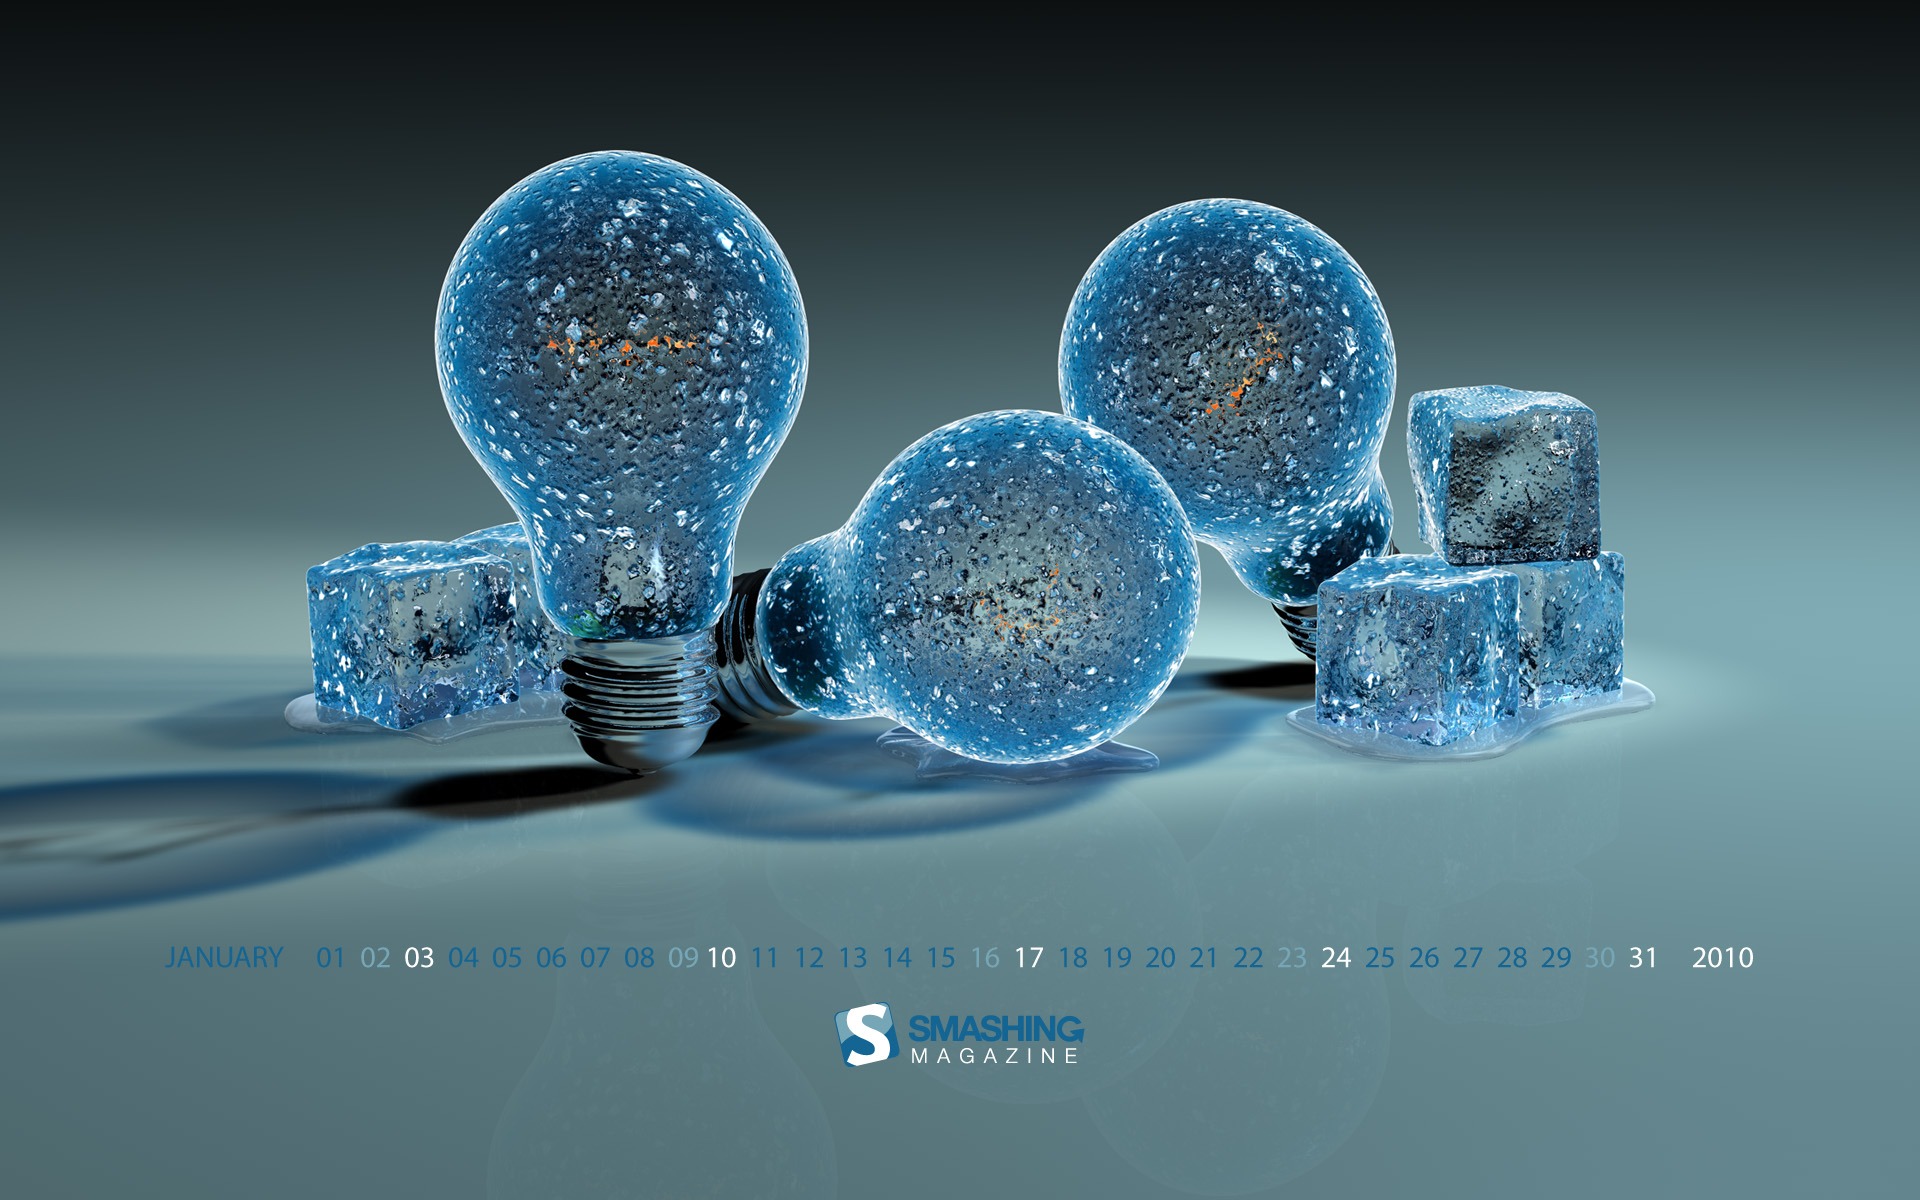 Microsoft Official Win7 New Year Wallpapers #6 - 1920x1200